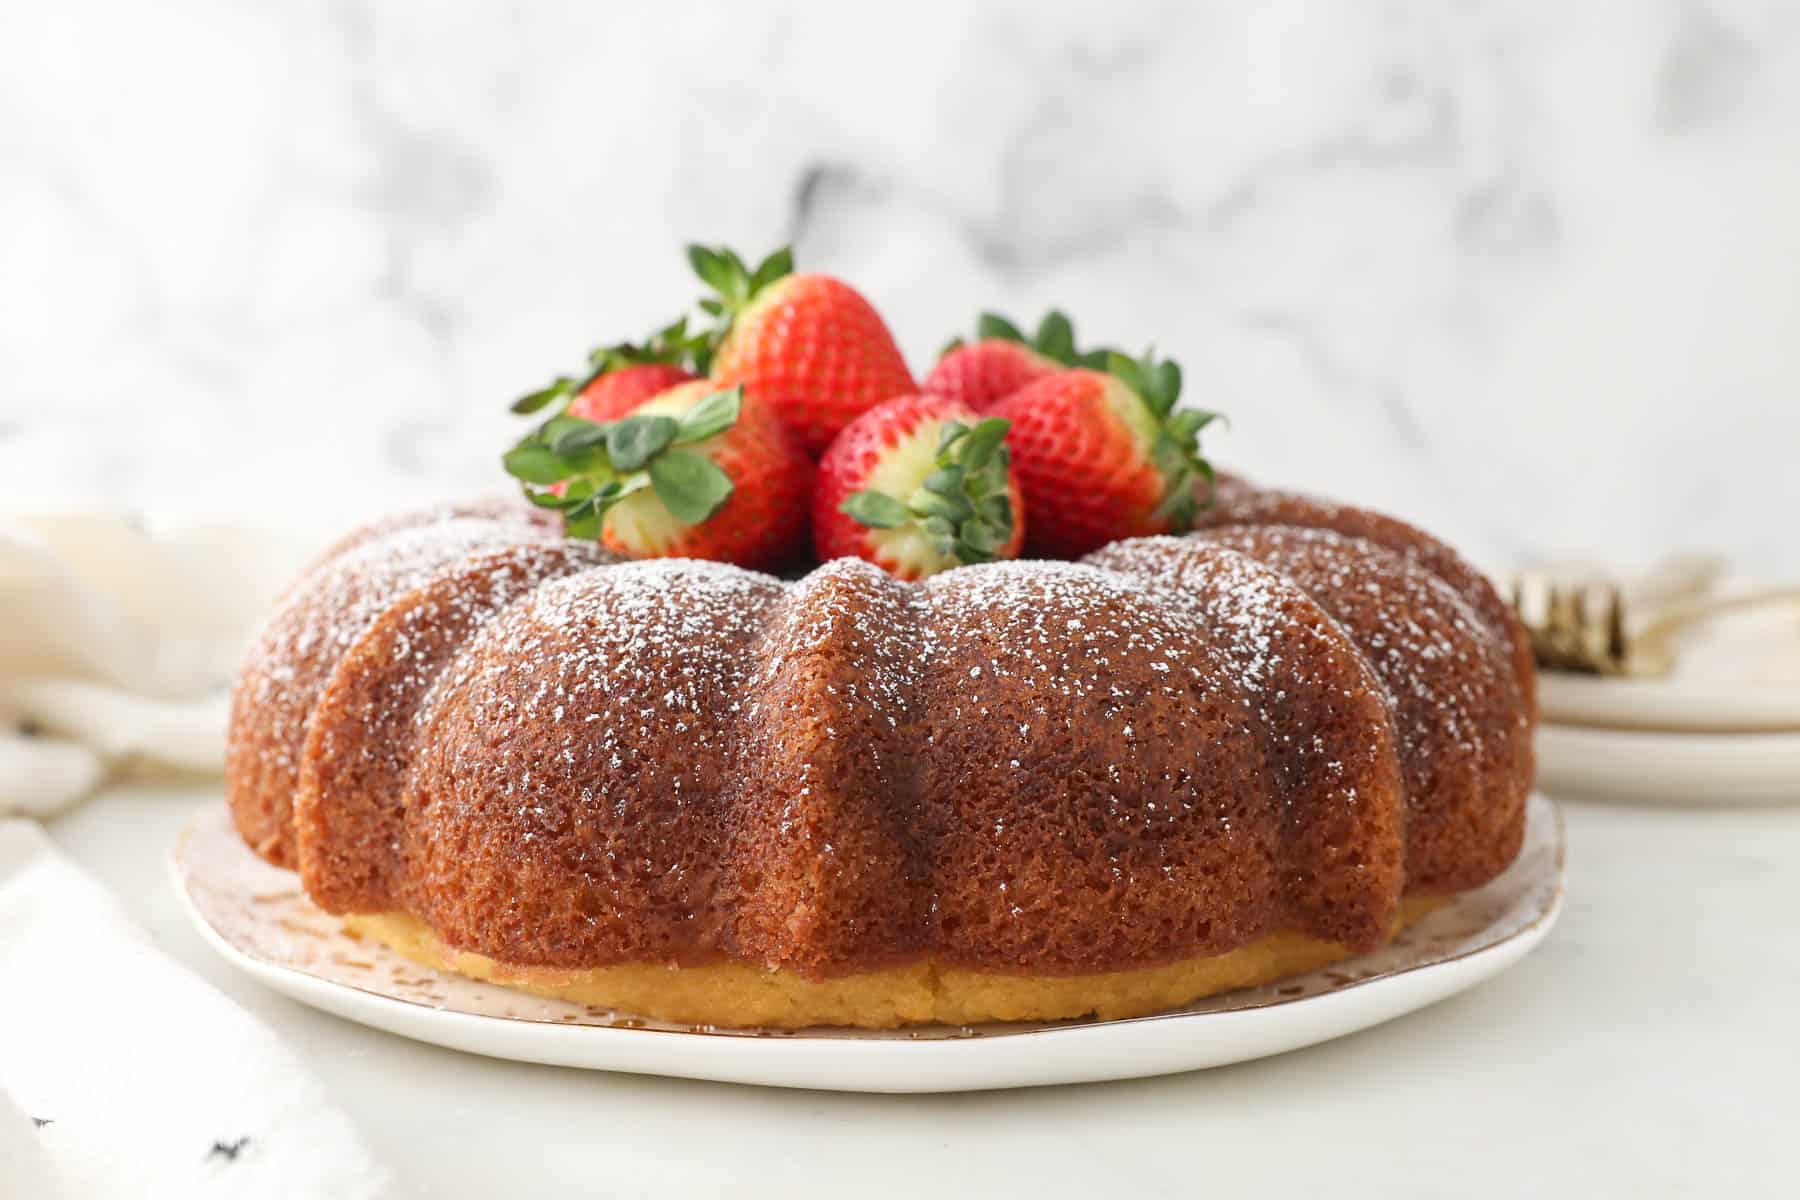 A spiced rum bundt cake topped with a dusting of powdered sugar and a pile of fresh strawberries